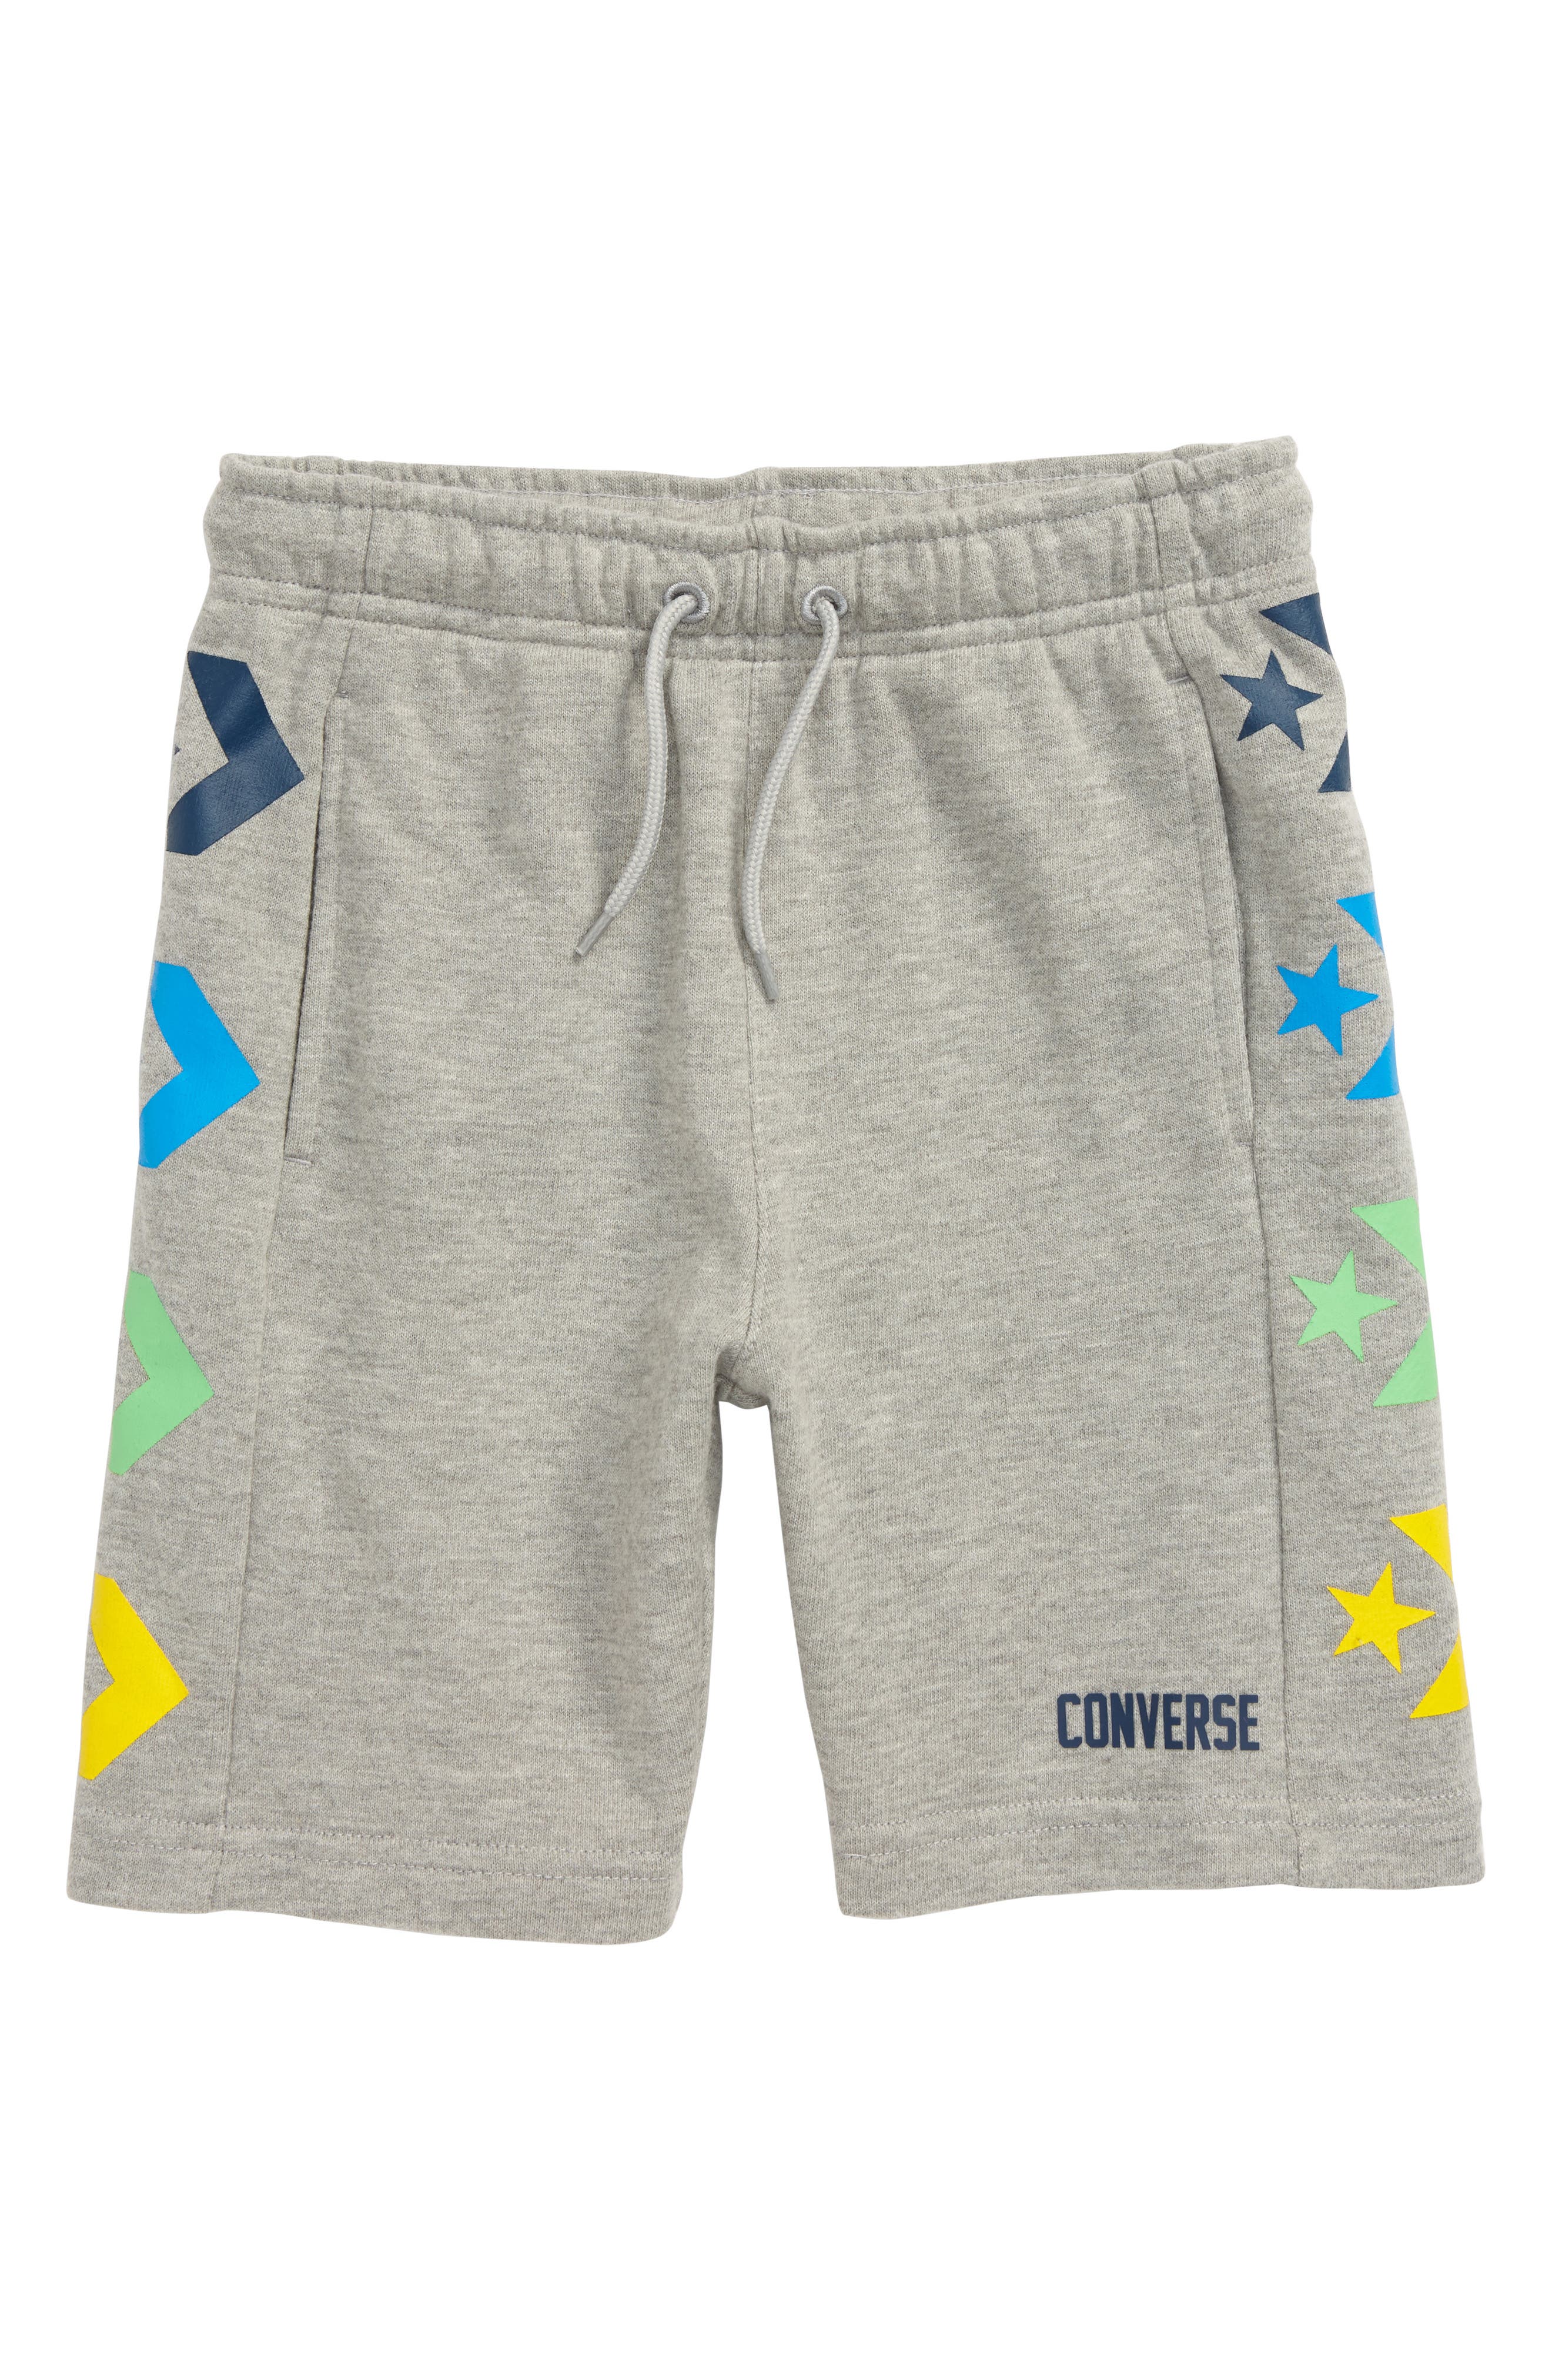 converse jumpers for boys